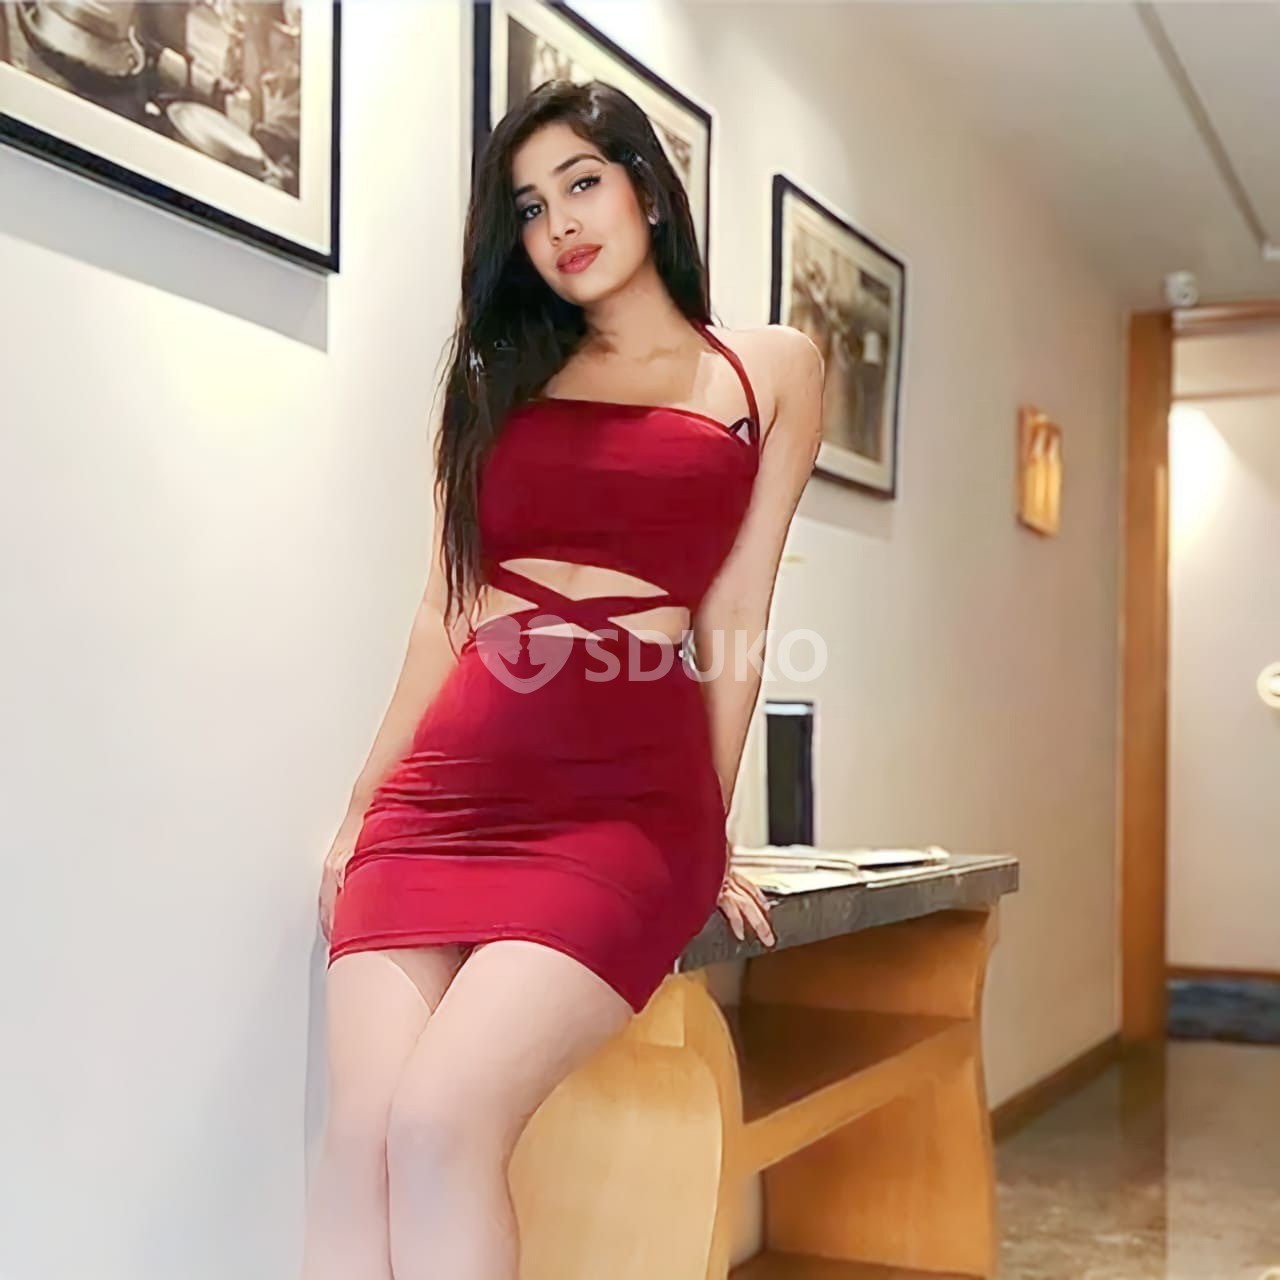 💖💖💖LOKHANDWALA 🌟BEST CALL GIRL INDEPENDENT ESCORT SERVICE IN LOW BUDGET